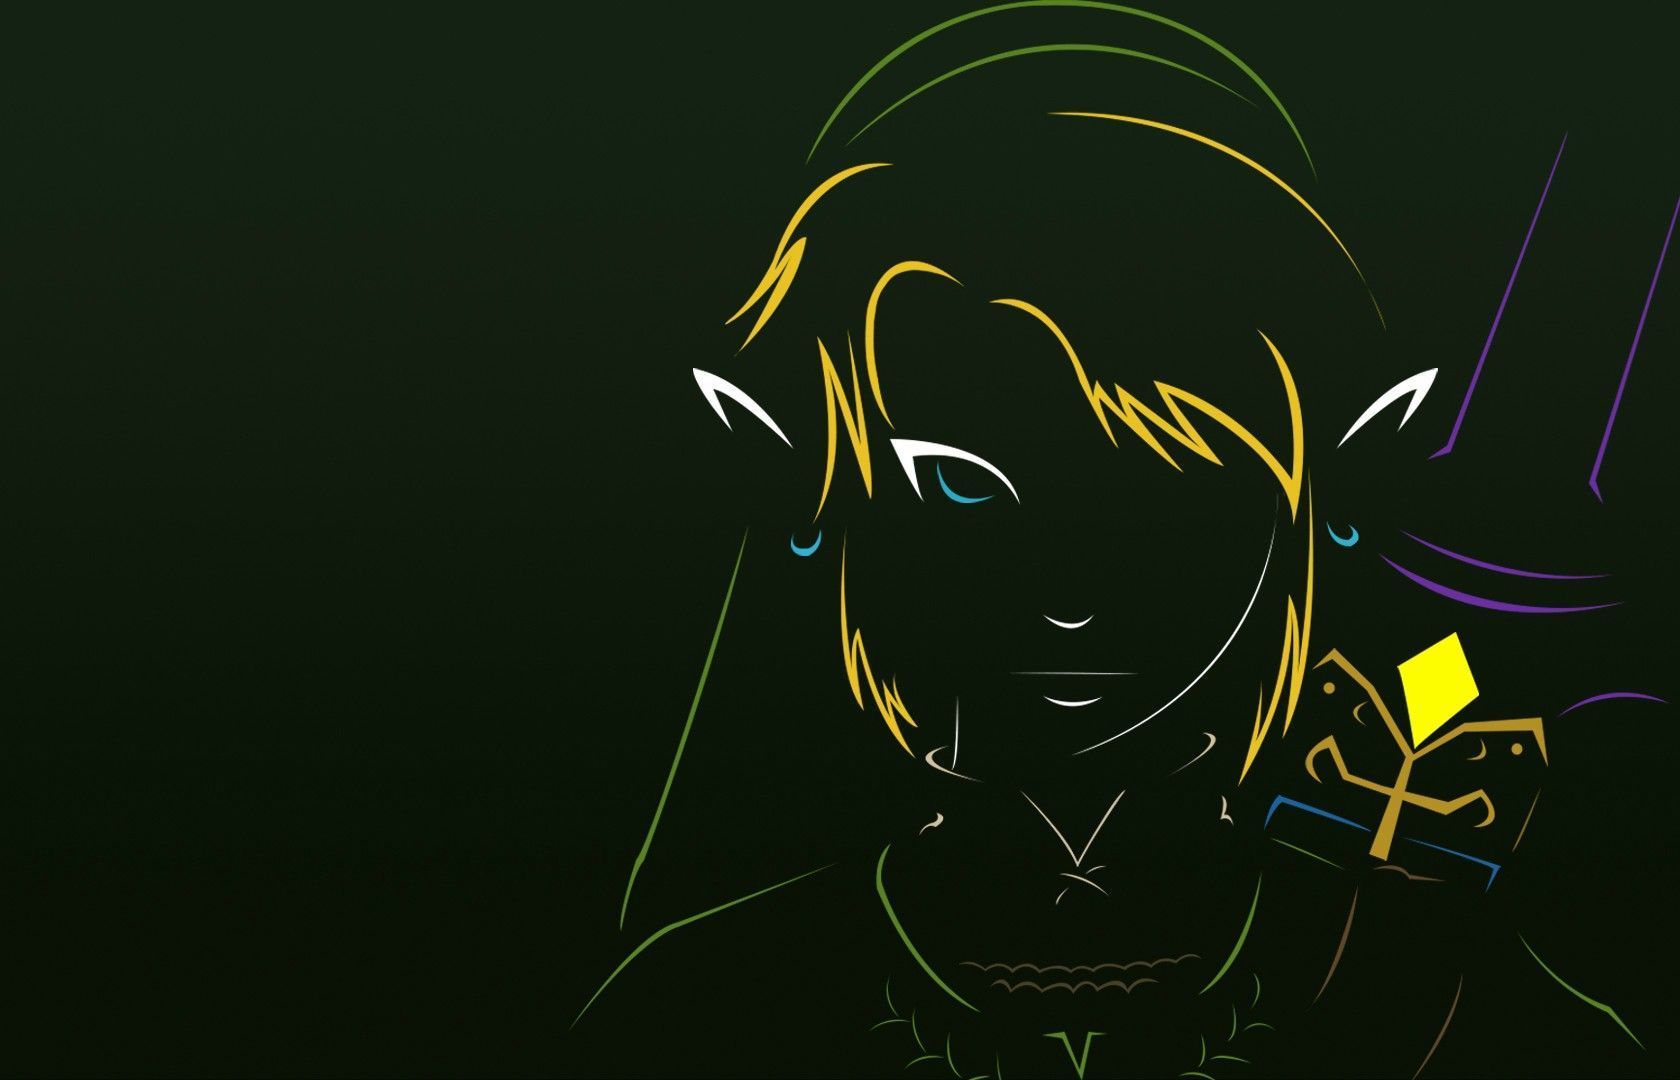 187 The Legend Of Zelda HD Wallpapers | Backgrounds - Wallpaper Abyss